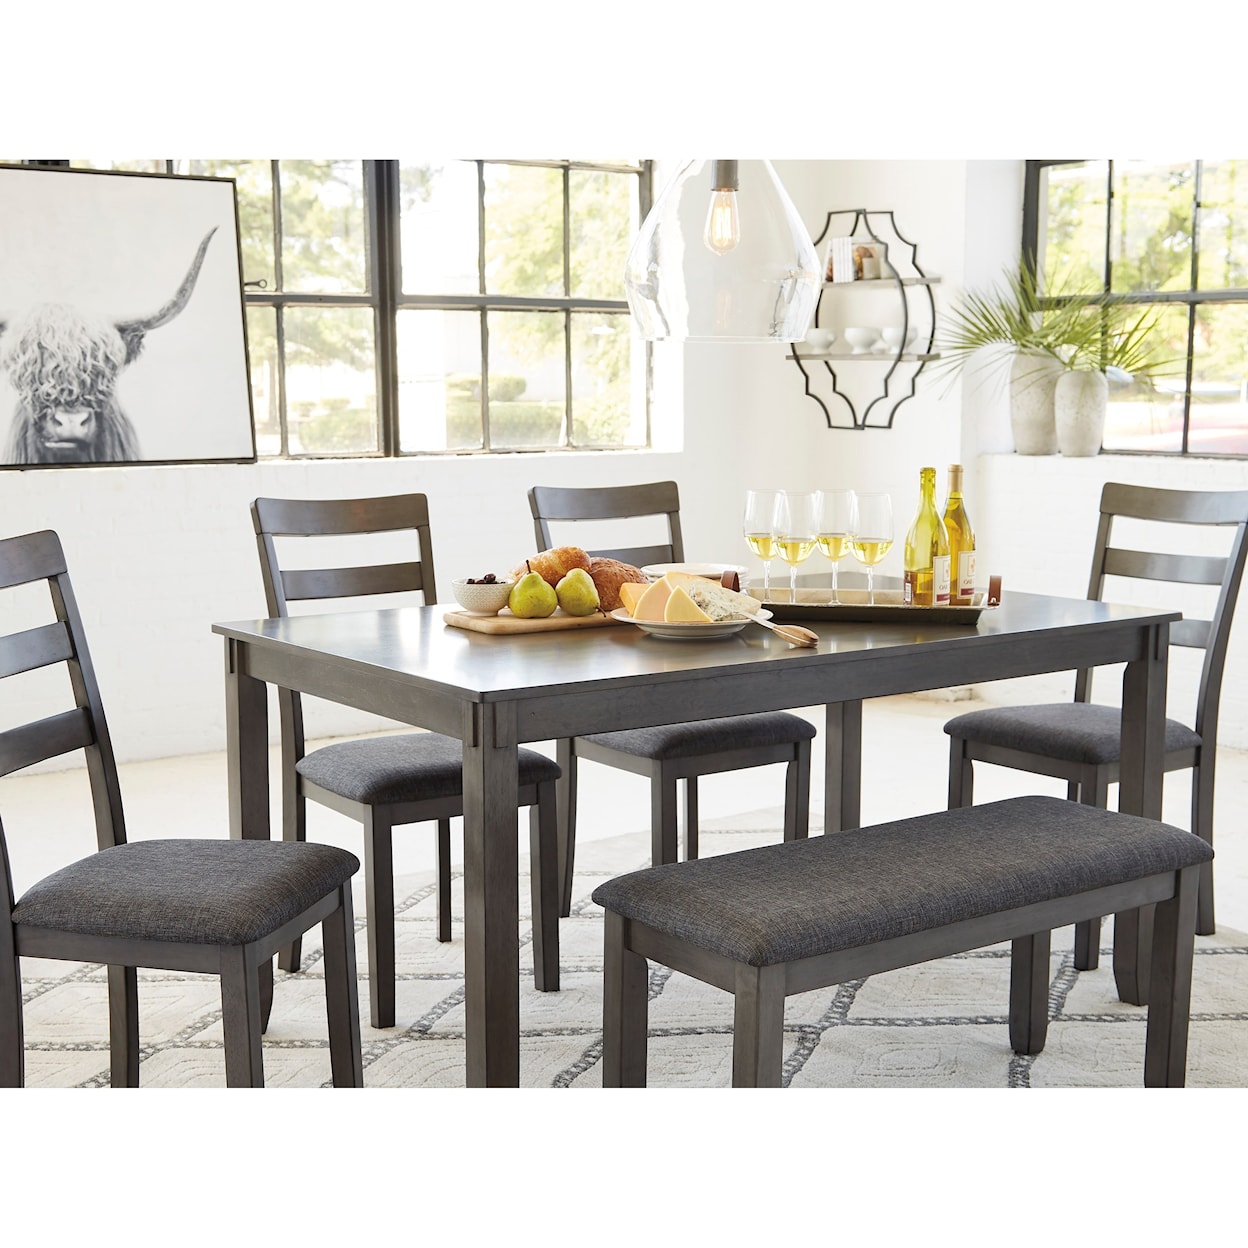 Signature Design by Ashley Furniture Bridson 6-Piece Rectangular Dining Room Table Set